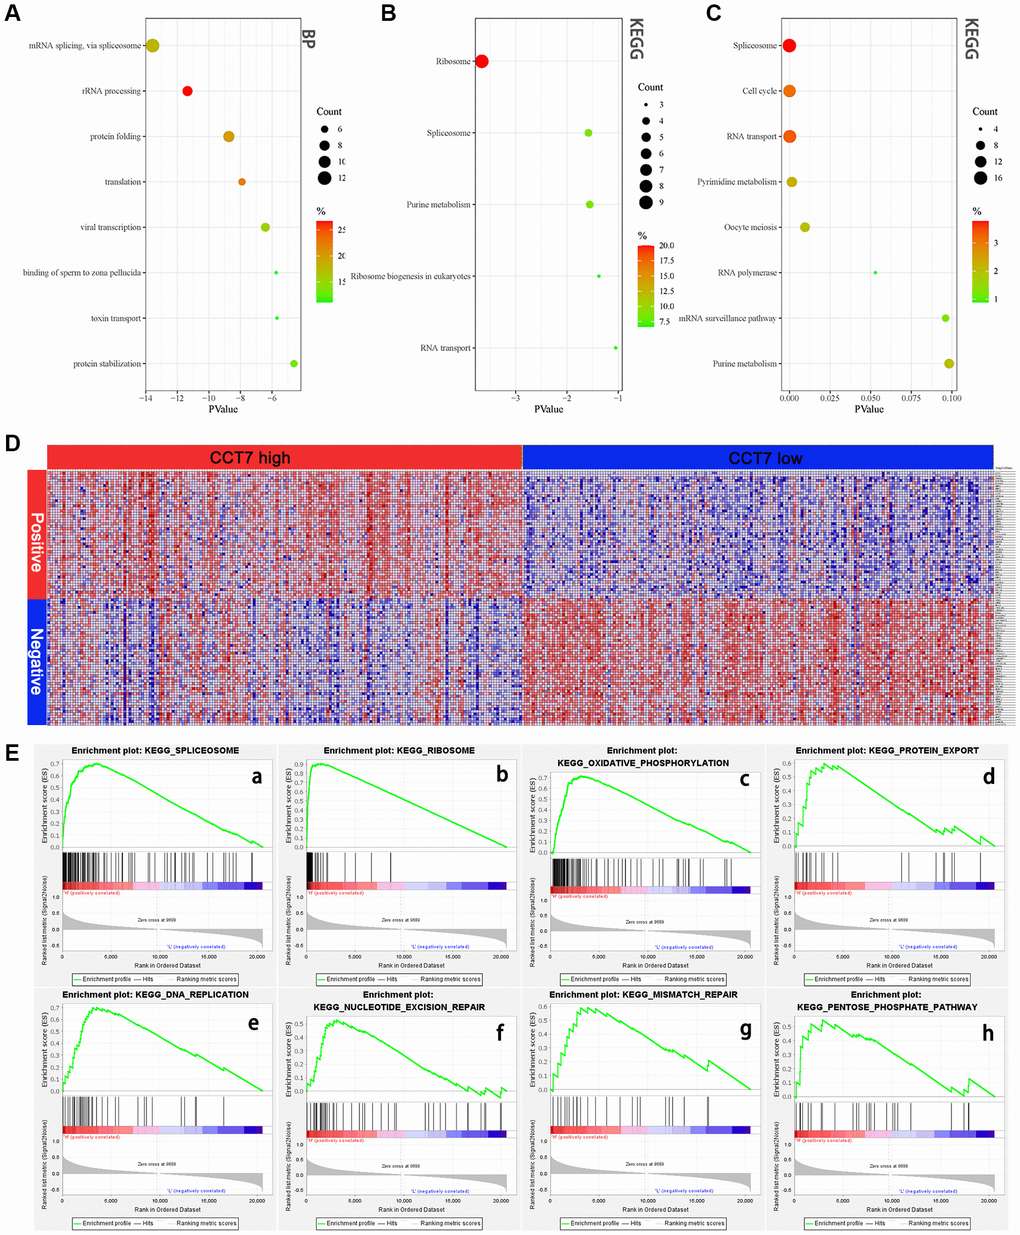 High CCT7 expression is associated with spliceosome gene expression in HCC patients. (A, B) The 45 genes co-expressed with CCT7 in HCC tissues, based on the GO Biological Process analysis (A) and KEGG pathway analysis (B). (C) The most significant survival-associated genes in HCC tissues, based on KEGG pathway analysis of data from the GEPIA database. (D) Heat map showing the median mRNA levels of genes co-expressed with CCT7 in HCC tissues in the GSEA. (E) The main enriched KEGG pathways of CCT7 based on GSEA. SPLICEOSOME (a), RIBOSOME (b), OXIDATIVE PHOSPHORYLATION (c), PROTEIN EXPORT (d), DNA REPLICATION (e), NUCLEOTIDE EXCISION PEPAIR (f), MISMATCH REPAIR (g), PENTOSE PHOSPHATE PATHWAY (h).